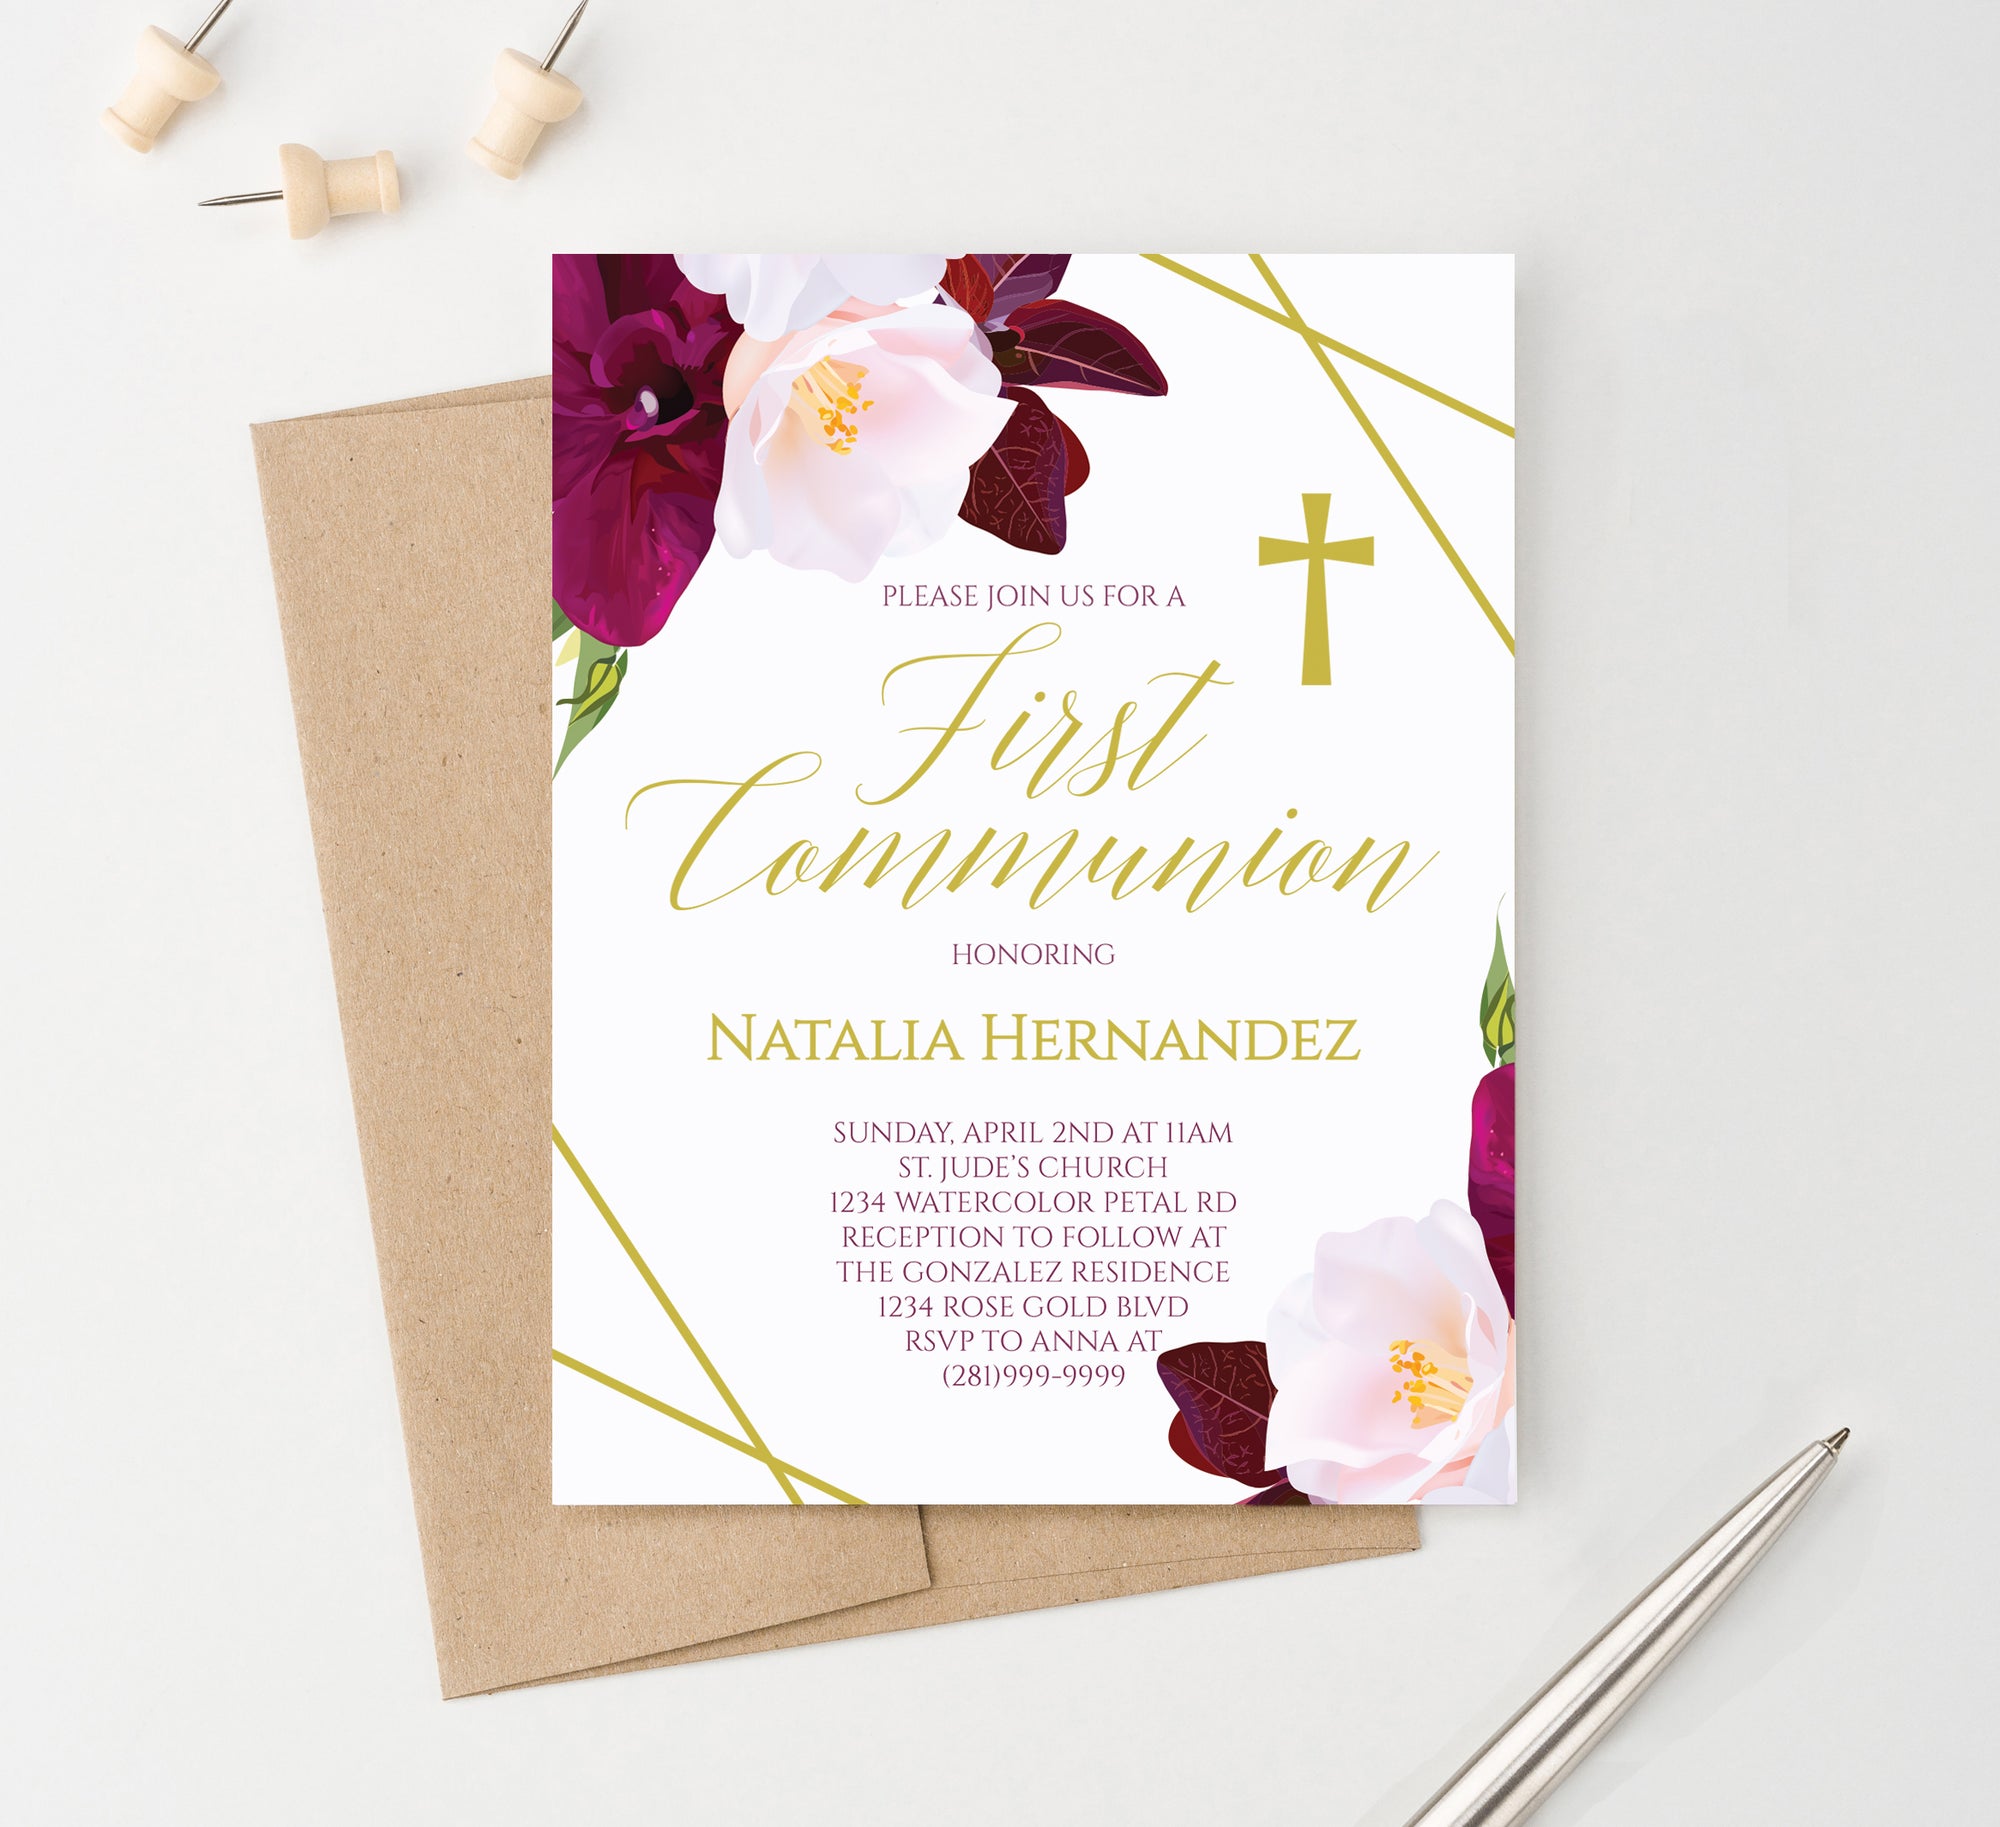 Personalized Burgundy And Gold Communion Invitations With Florals